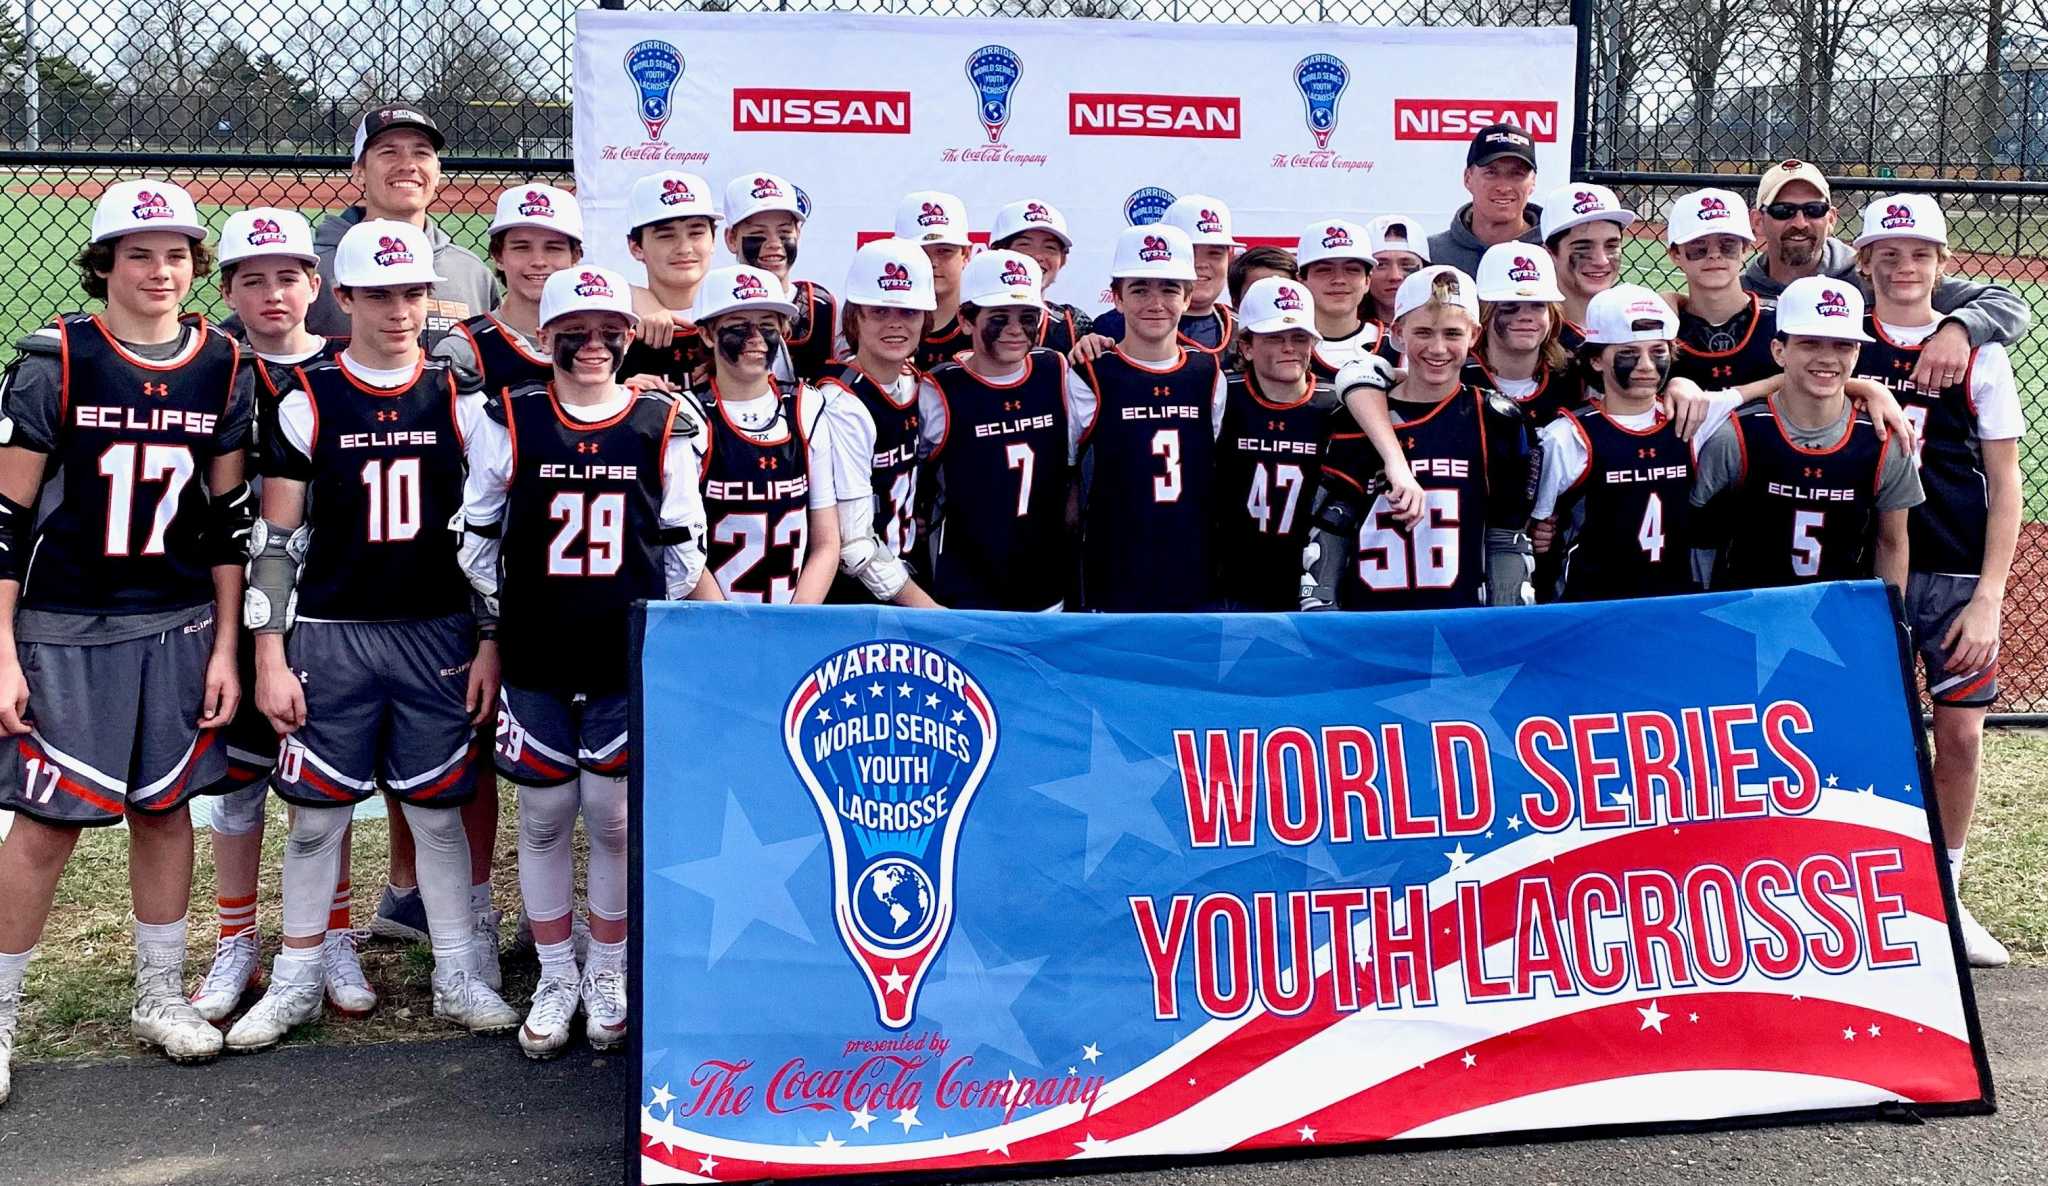 Eclipse Lacrosse Club playing in World Series of Youth Lacrosse